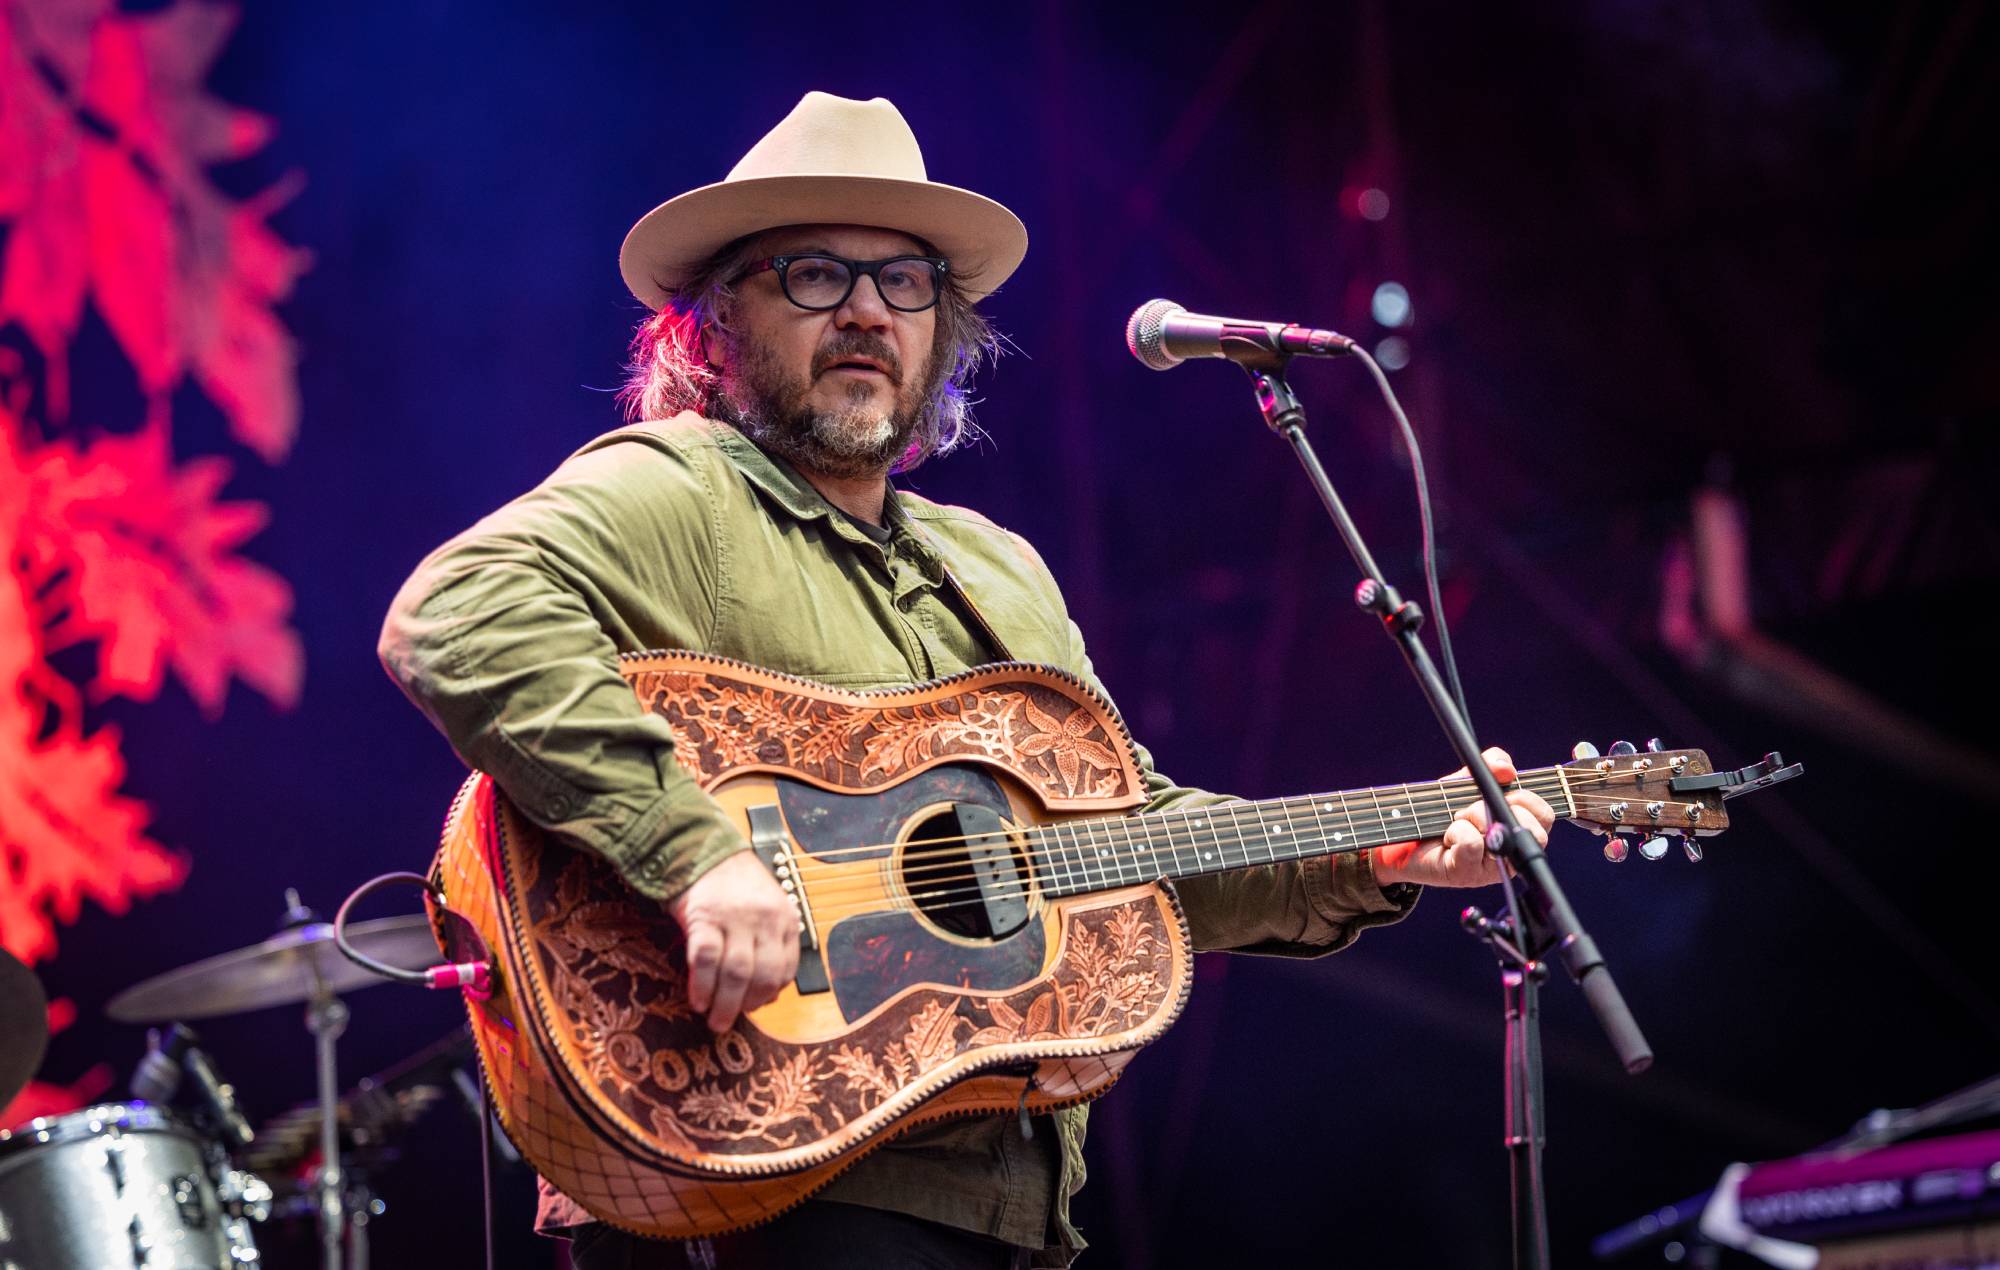 eff Tweedy from Wilco performs on stage at the Loaded Festival on June 11, 2022 in Oslo, Norway. (Photo by Per Ole Hagen/Redferns)